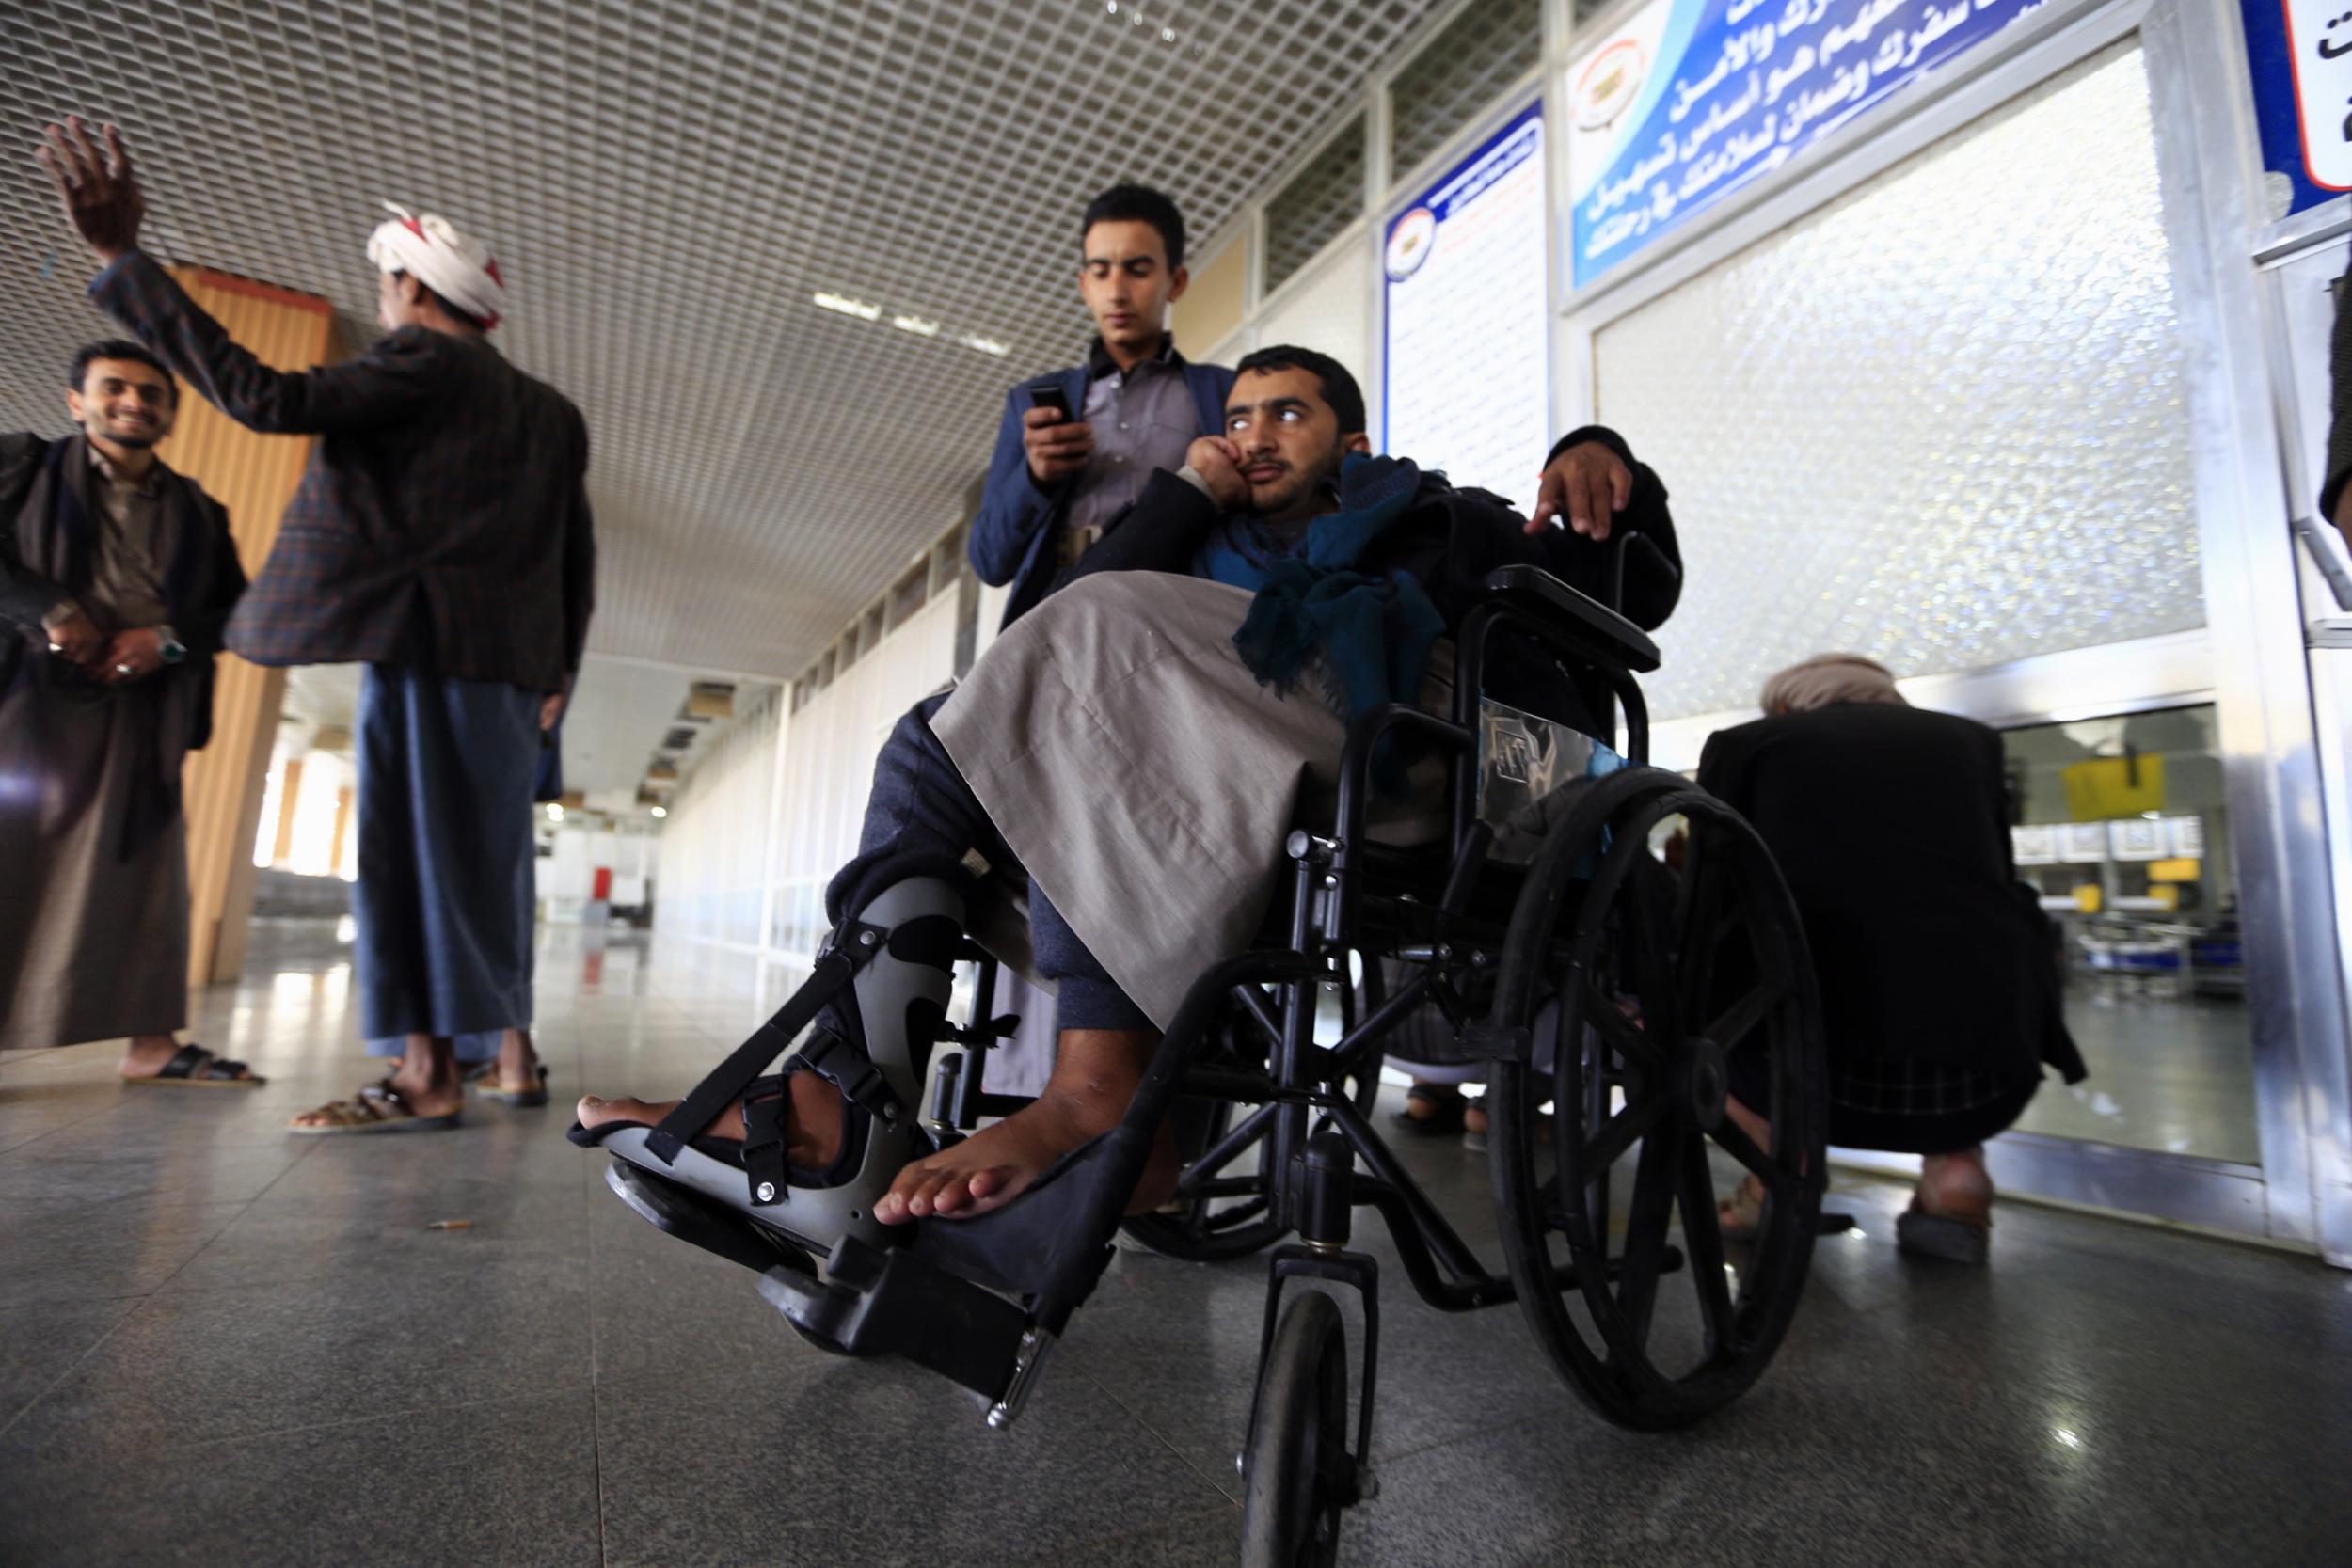 Yemen’s Houthi wounded fighters waiting to depart Sana’a to get treatment in Oman ahead of UN-brokered peace talks